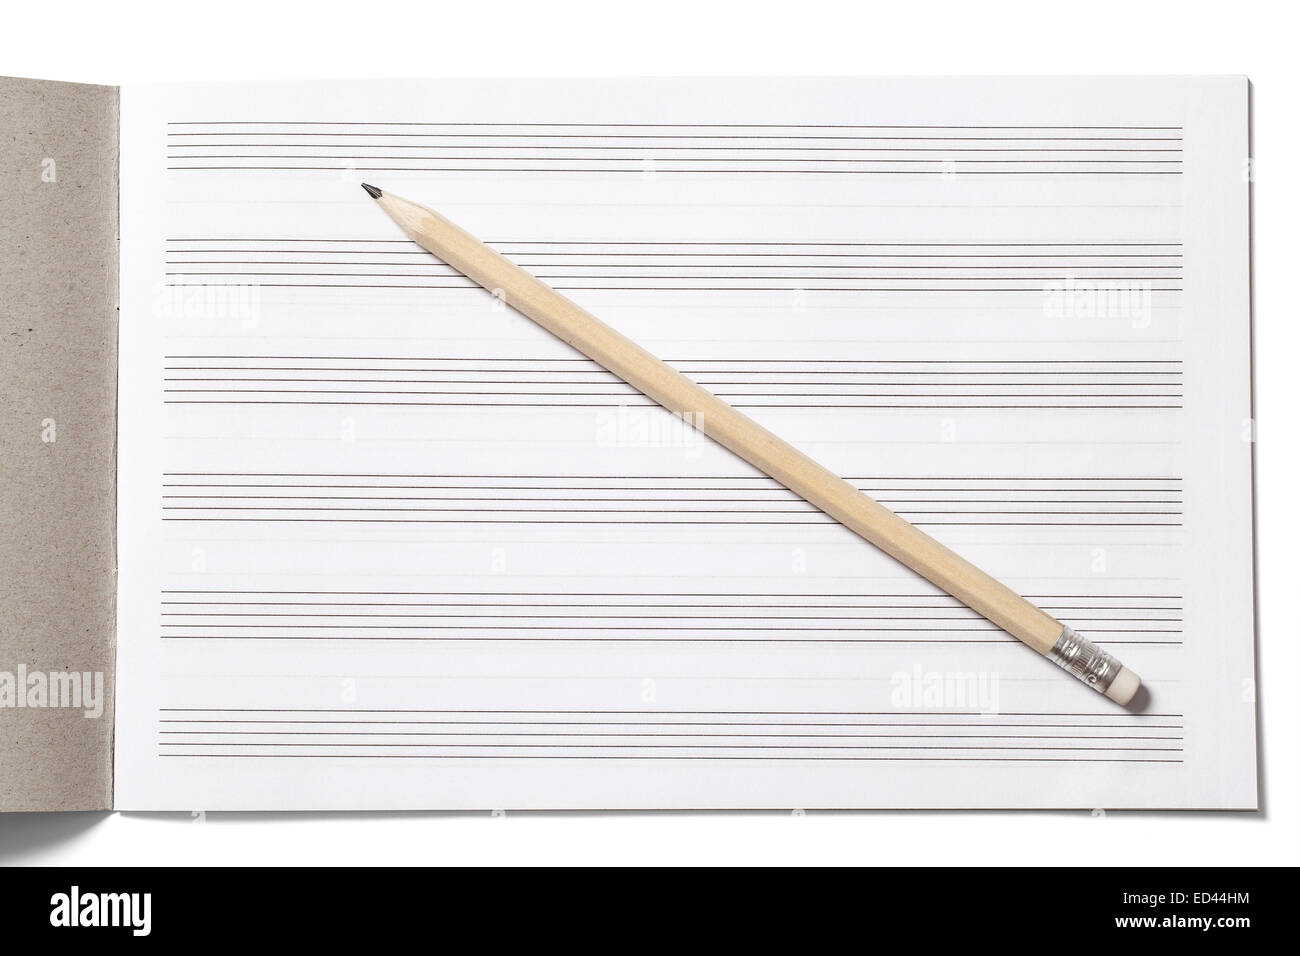 Notebook for musical notes and pencil on white Stock Photo